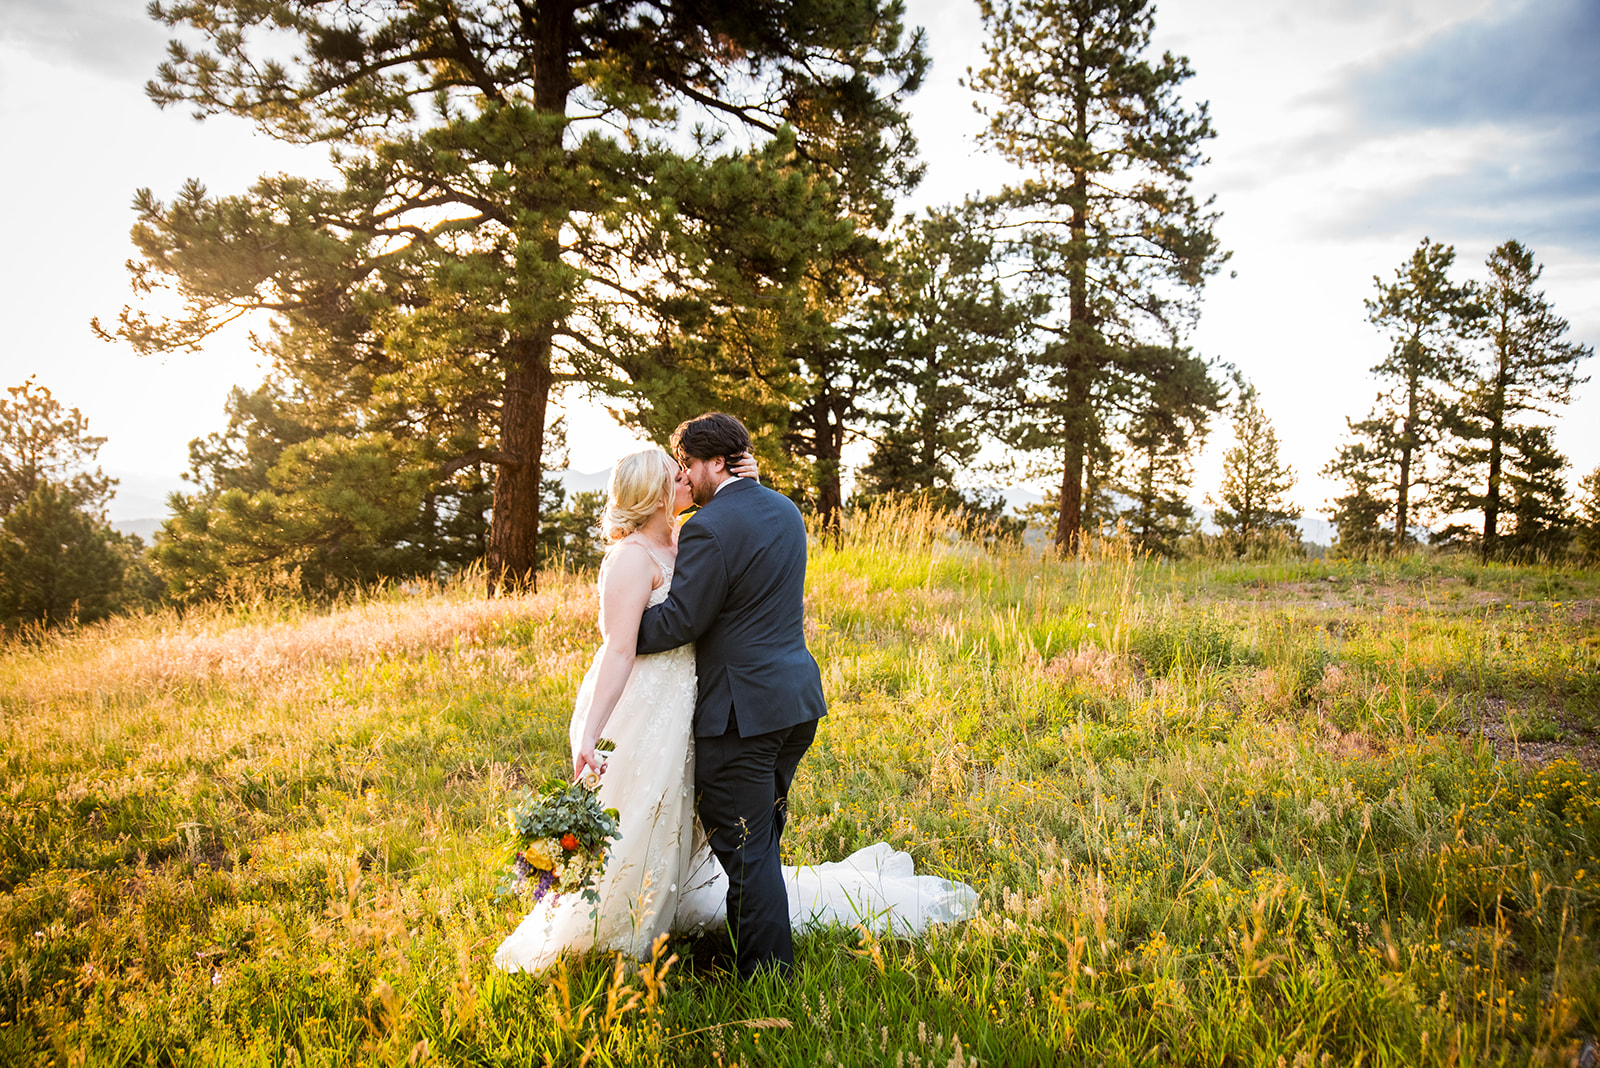 The bride and groom share a kiss in a grassy field at golden hour.